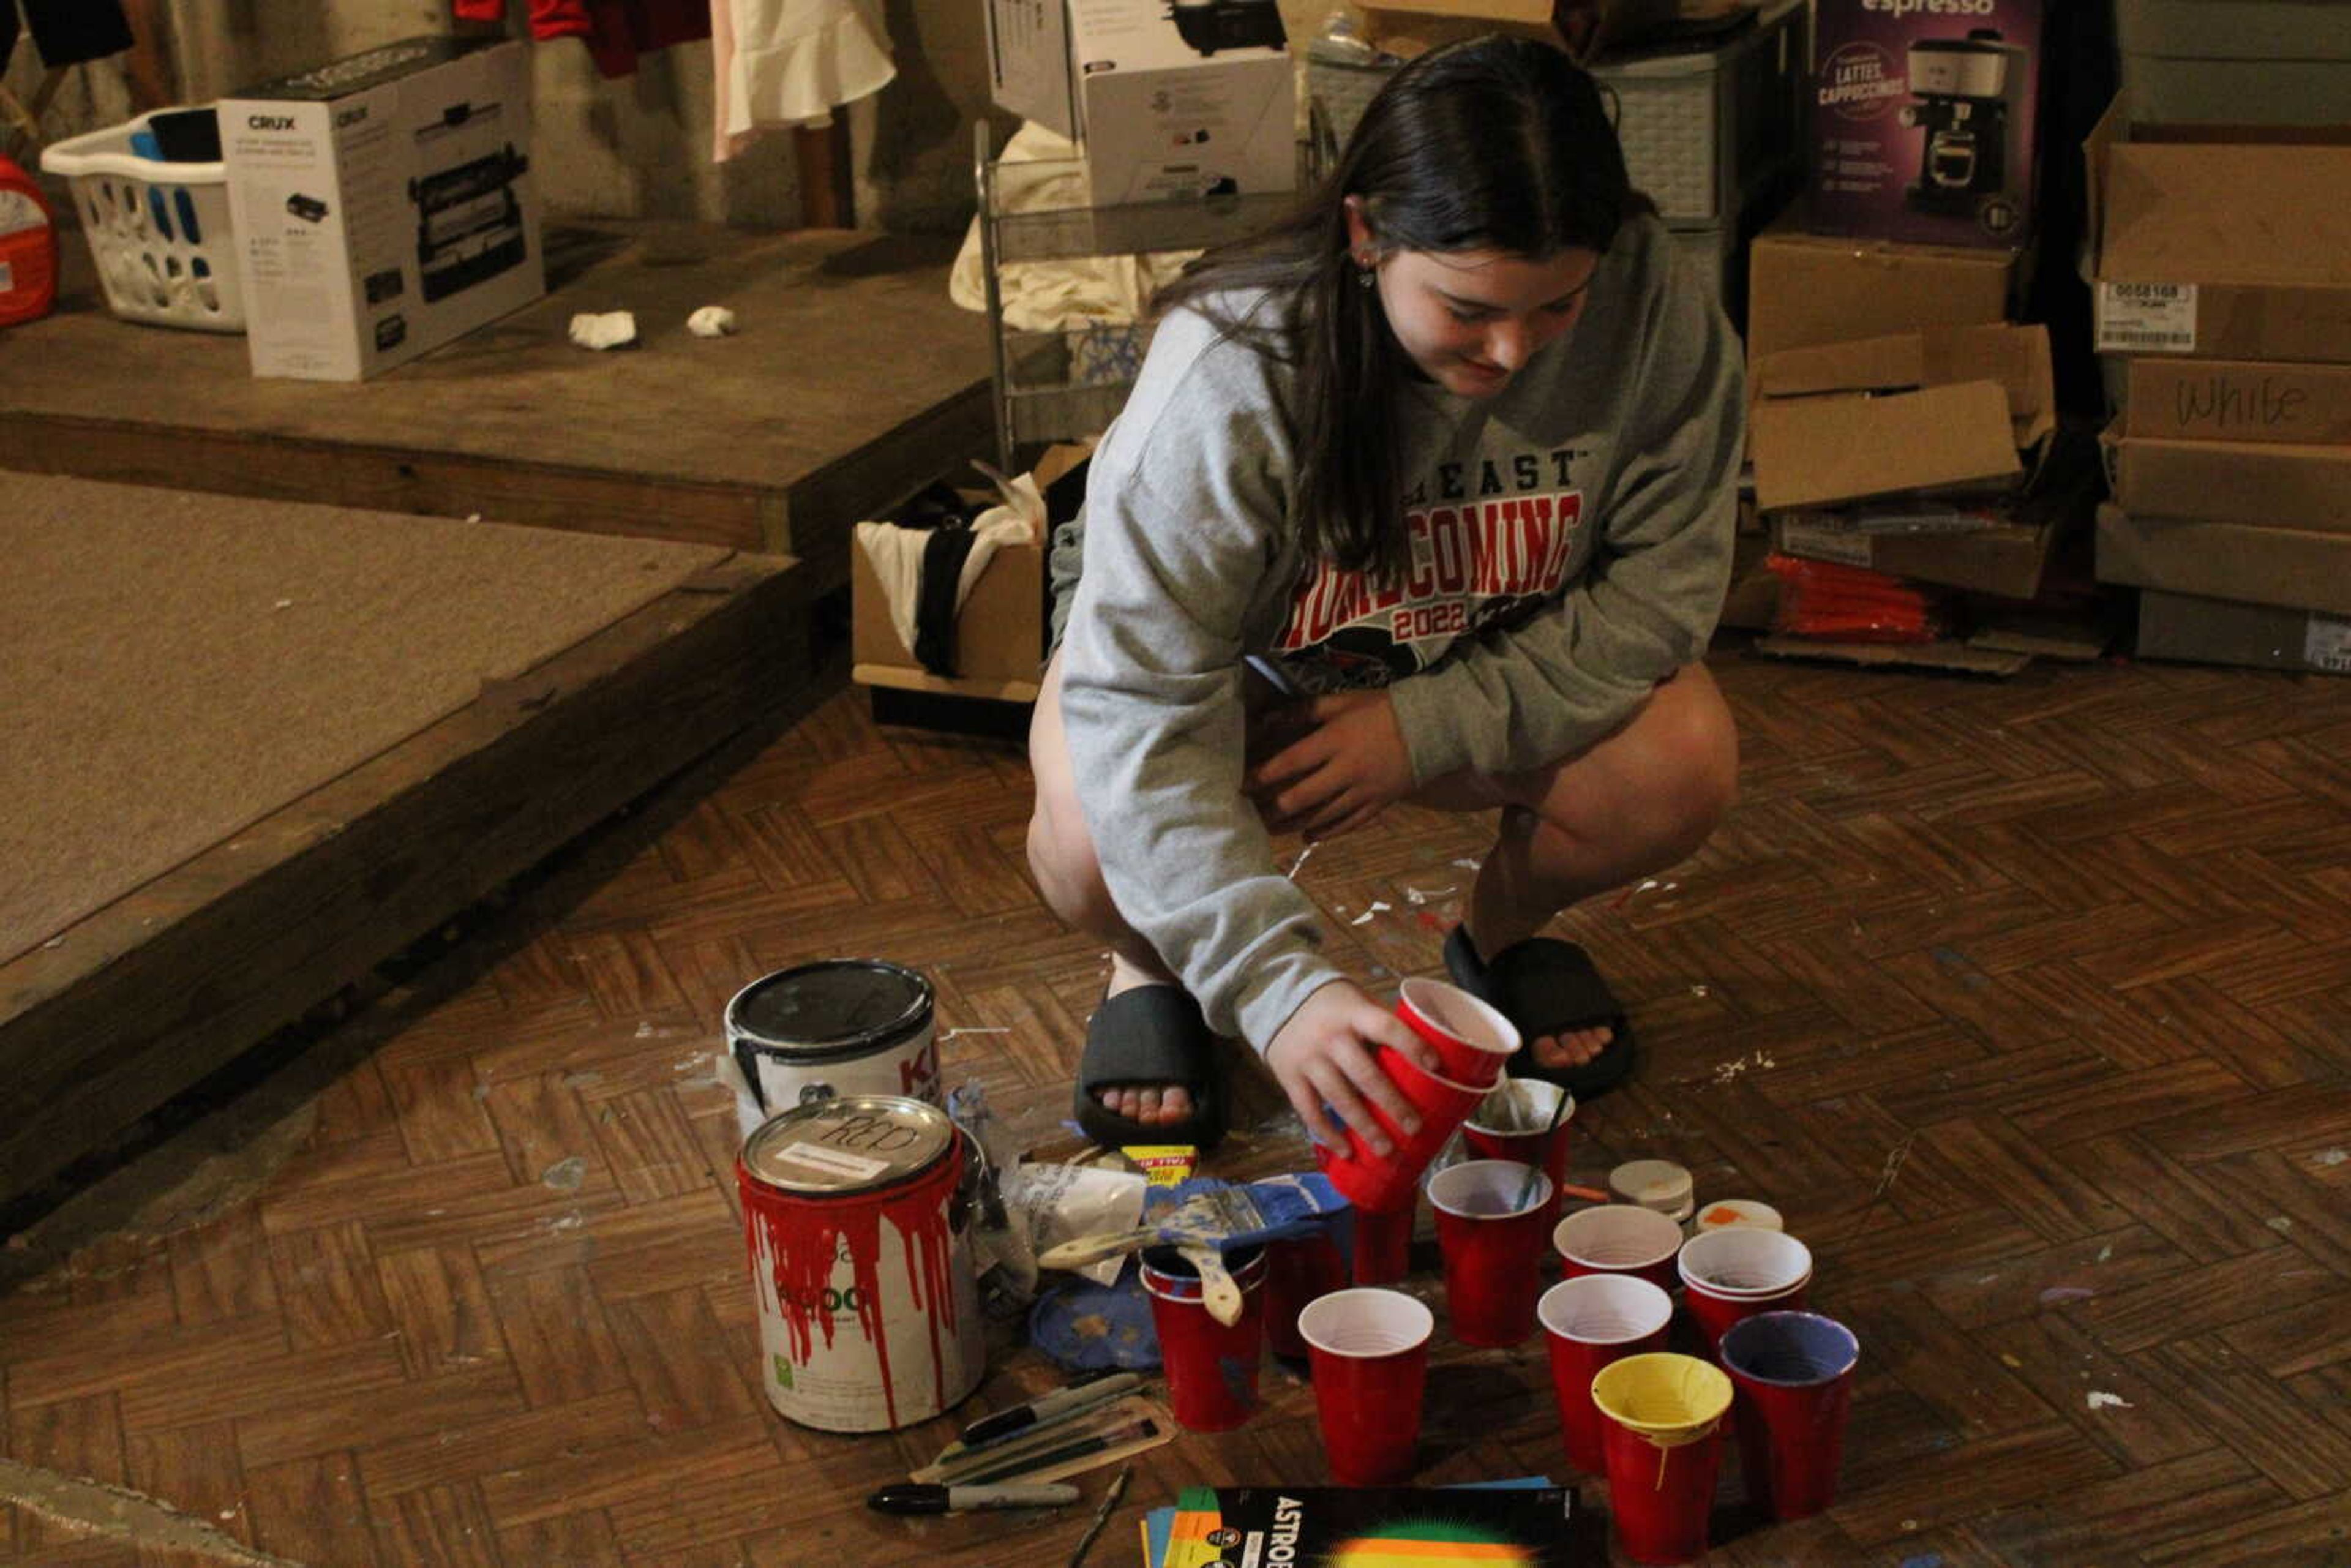 Junior occupational therapy major and Delta Delta Delta (Tri Delta) Homecoming chair Mikayla Beachle organizes the pomping and painting supplies in the basement of the Tri Delta off-campus house. "It's rewarding to just see everybody working together," Beachle said.
